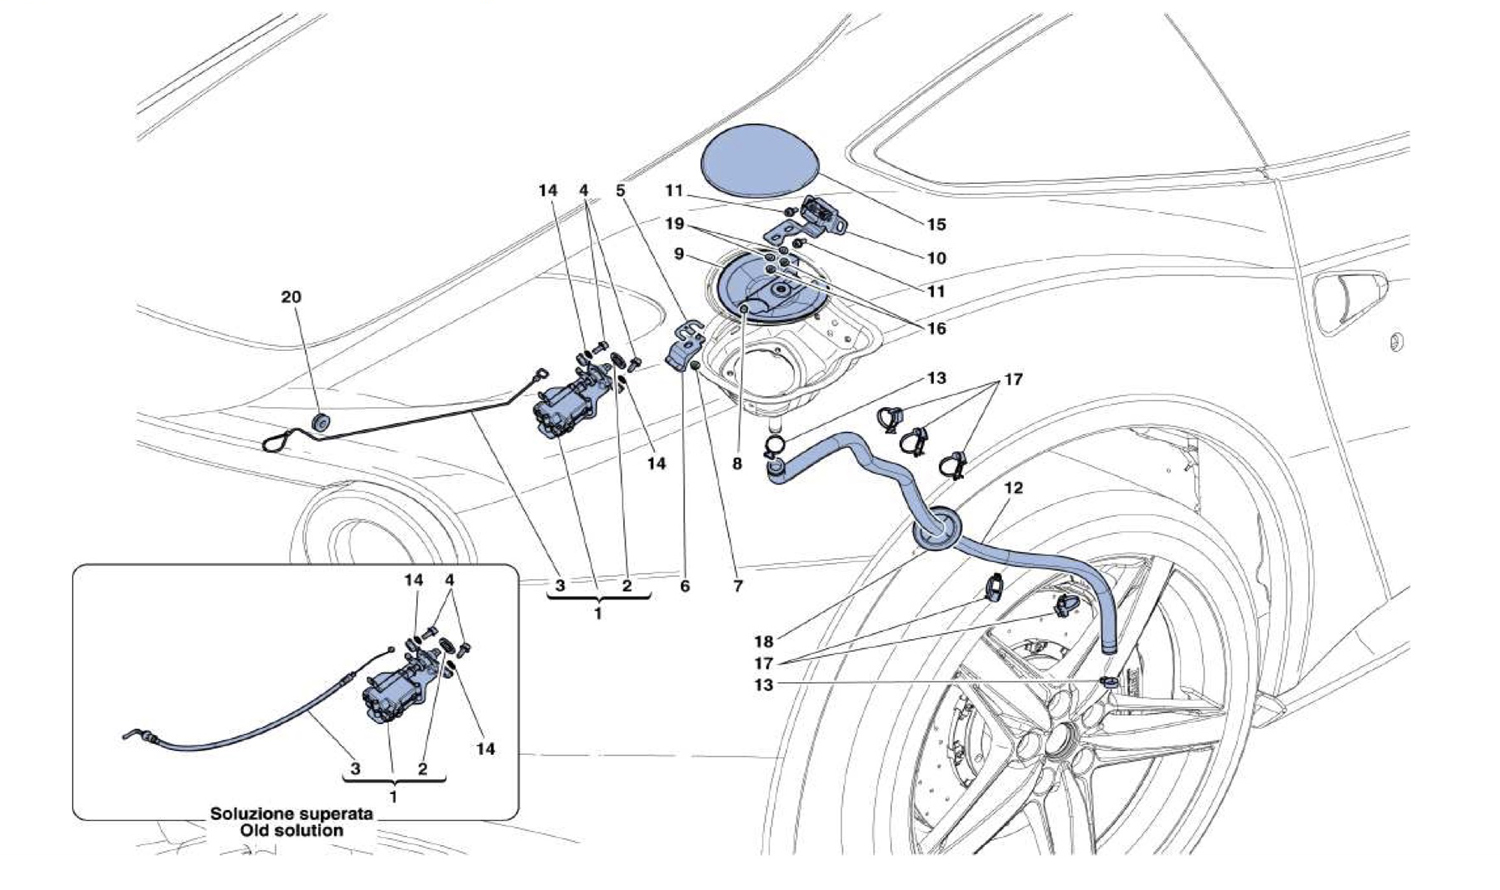 Schematic: Fuel Filler Flap And Controls